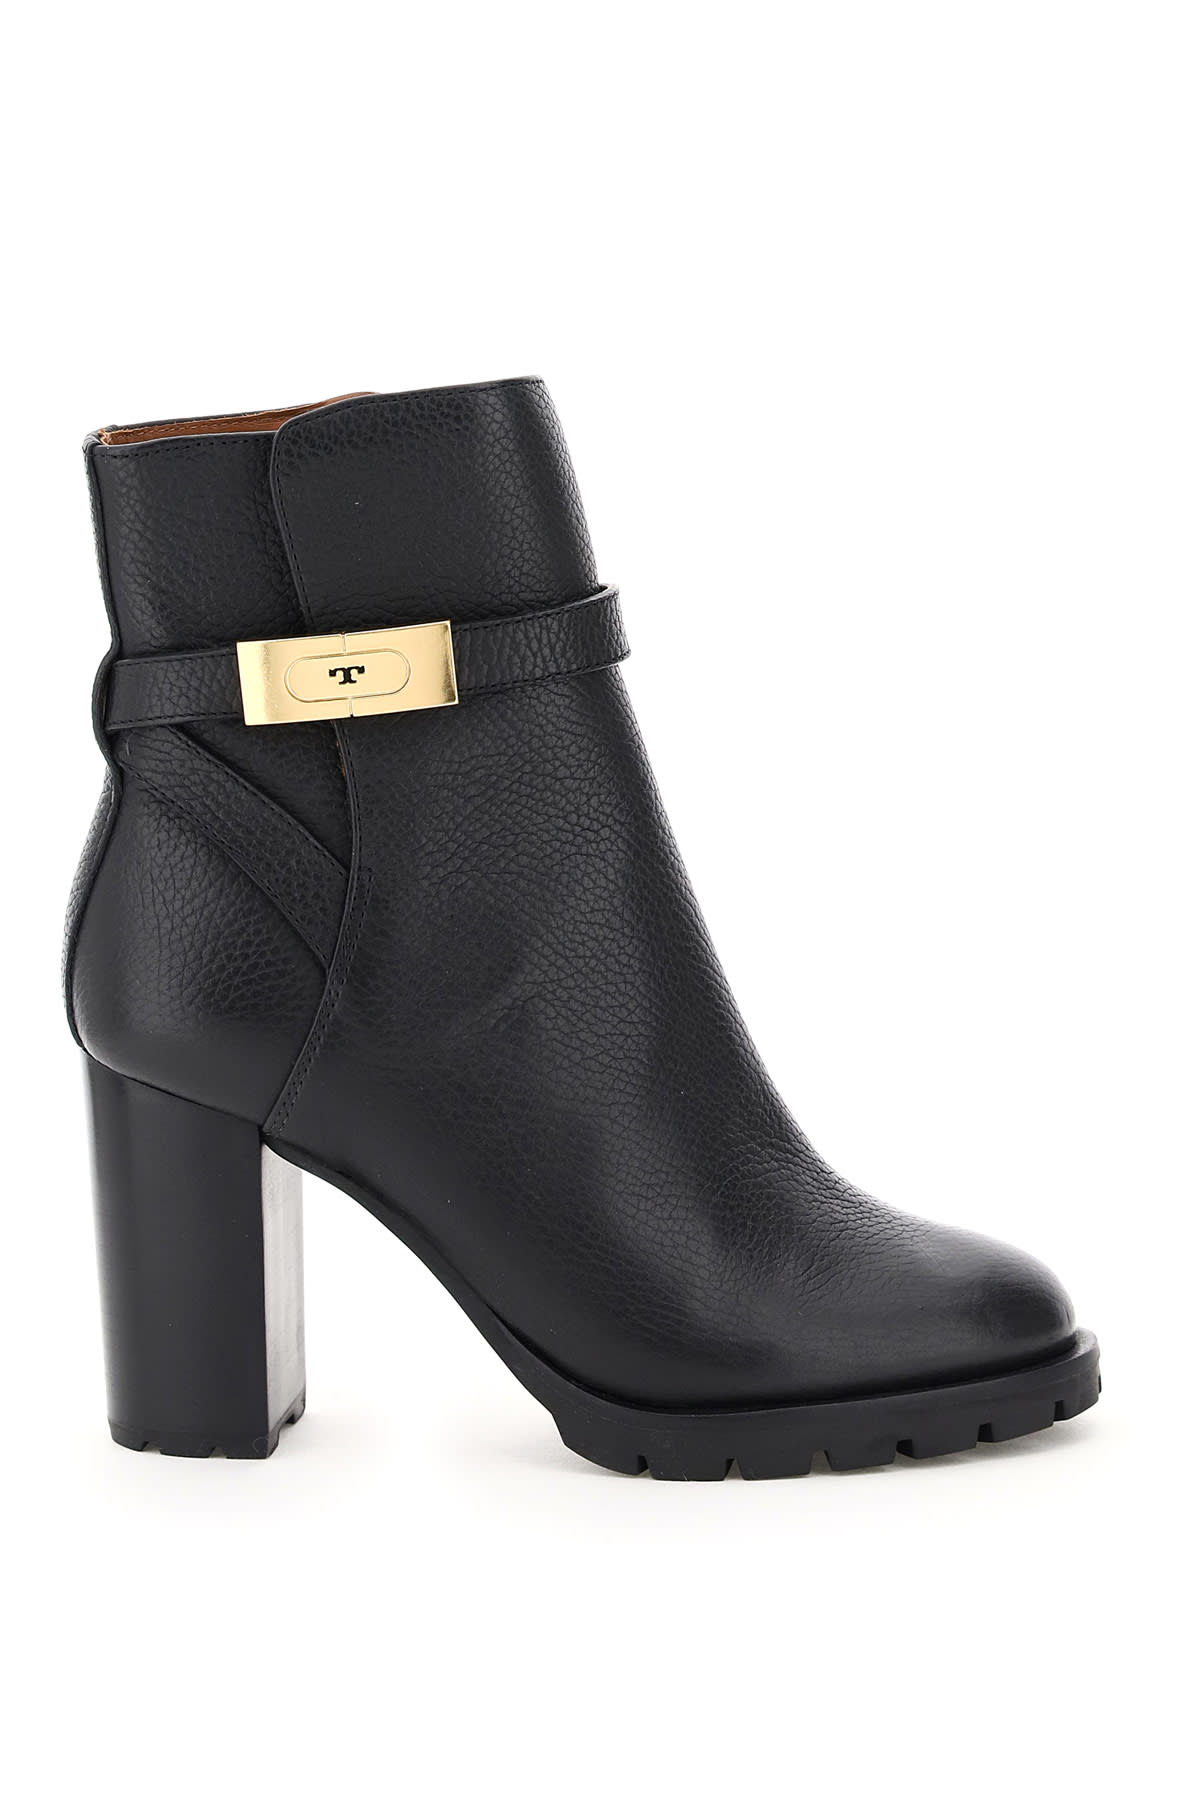 Buy Tory Burch Leather Ankle Boots online, shop Tory Burch shoes with free shipping